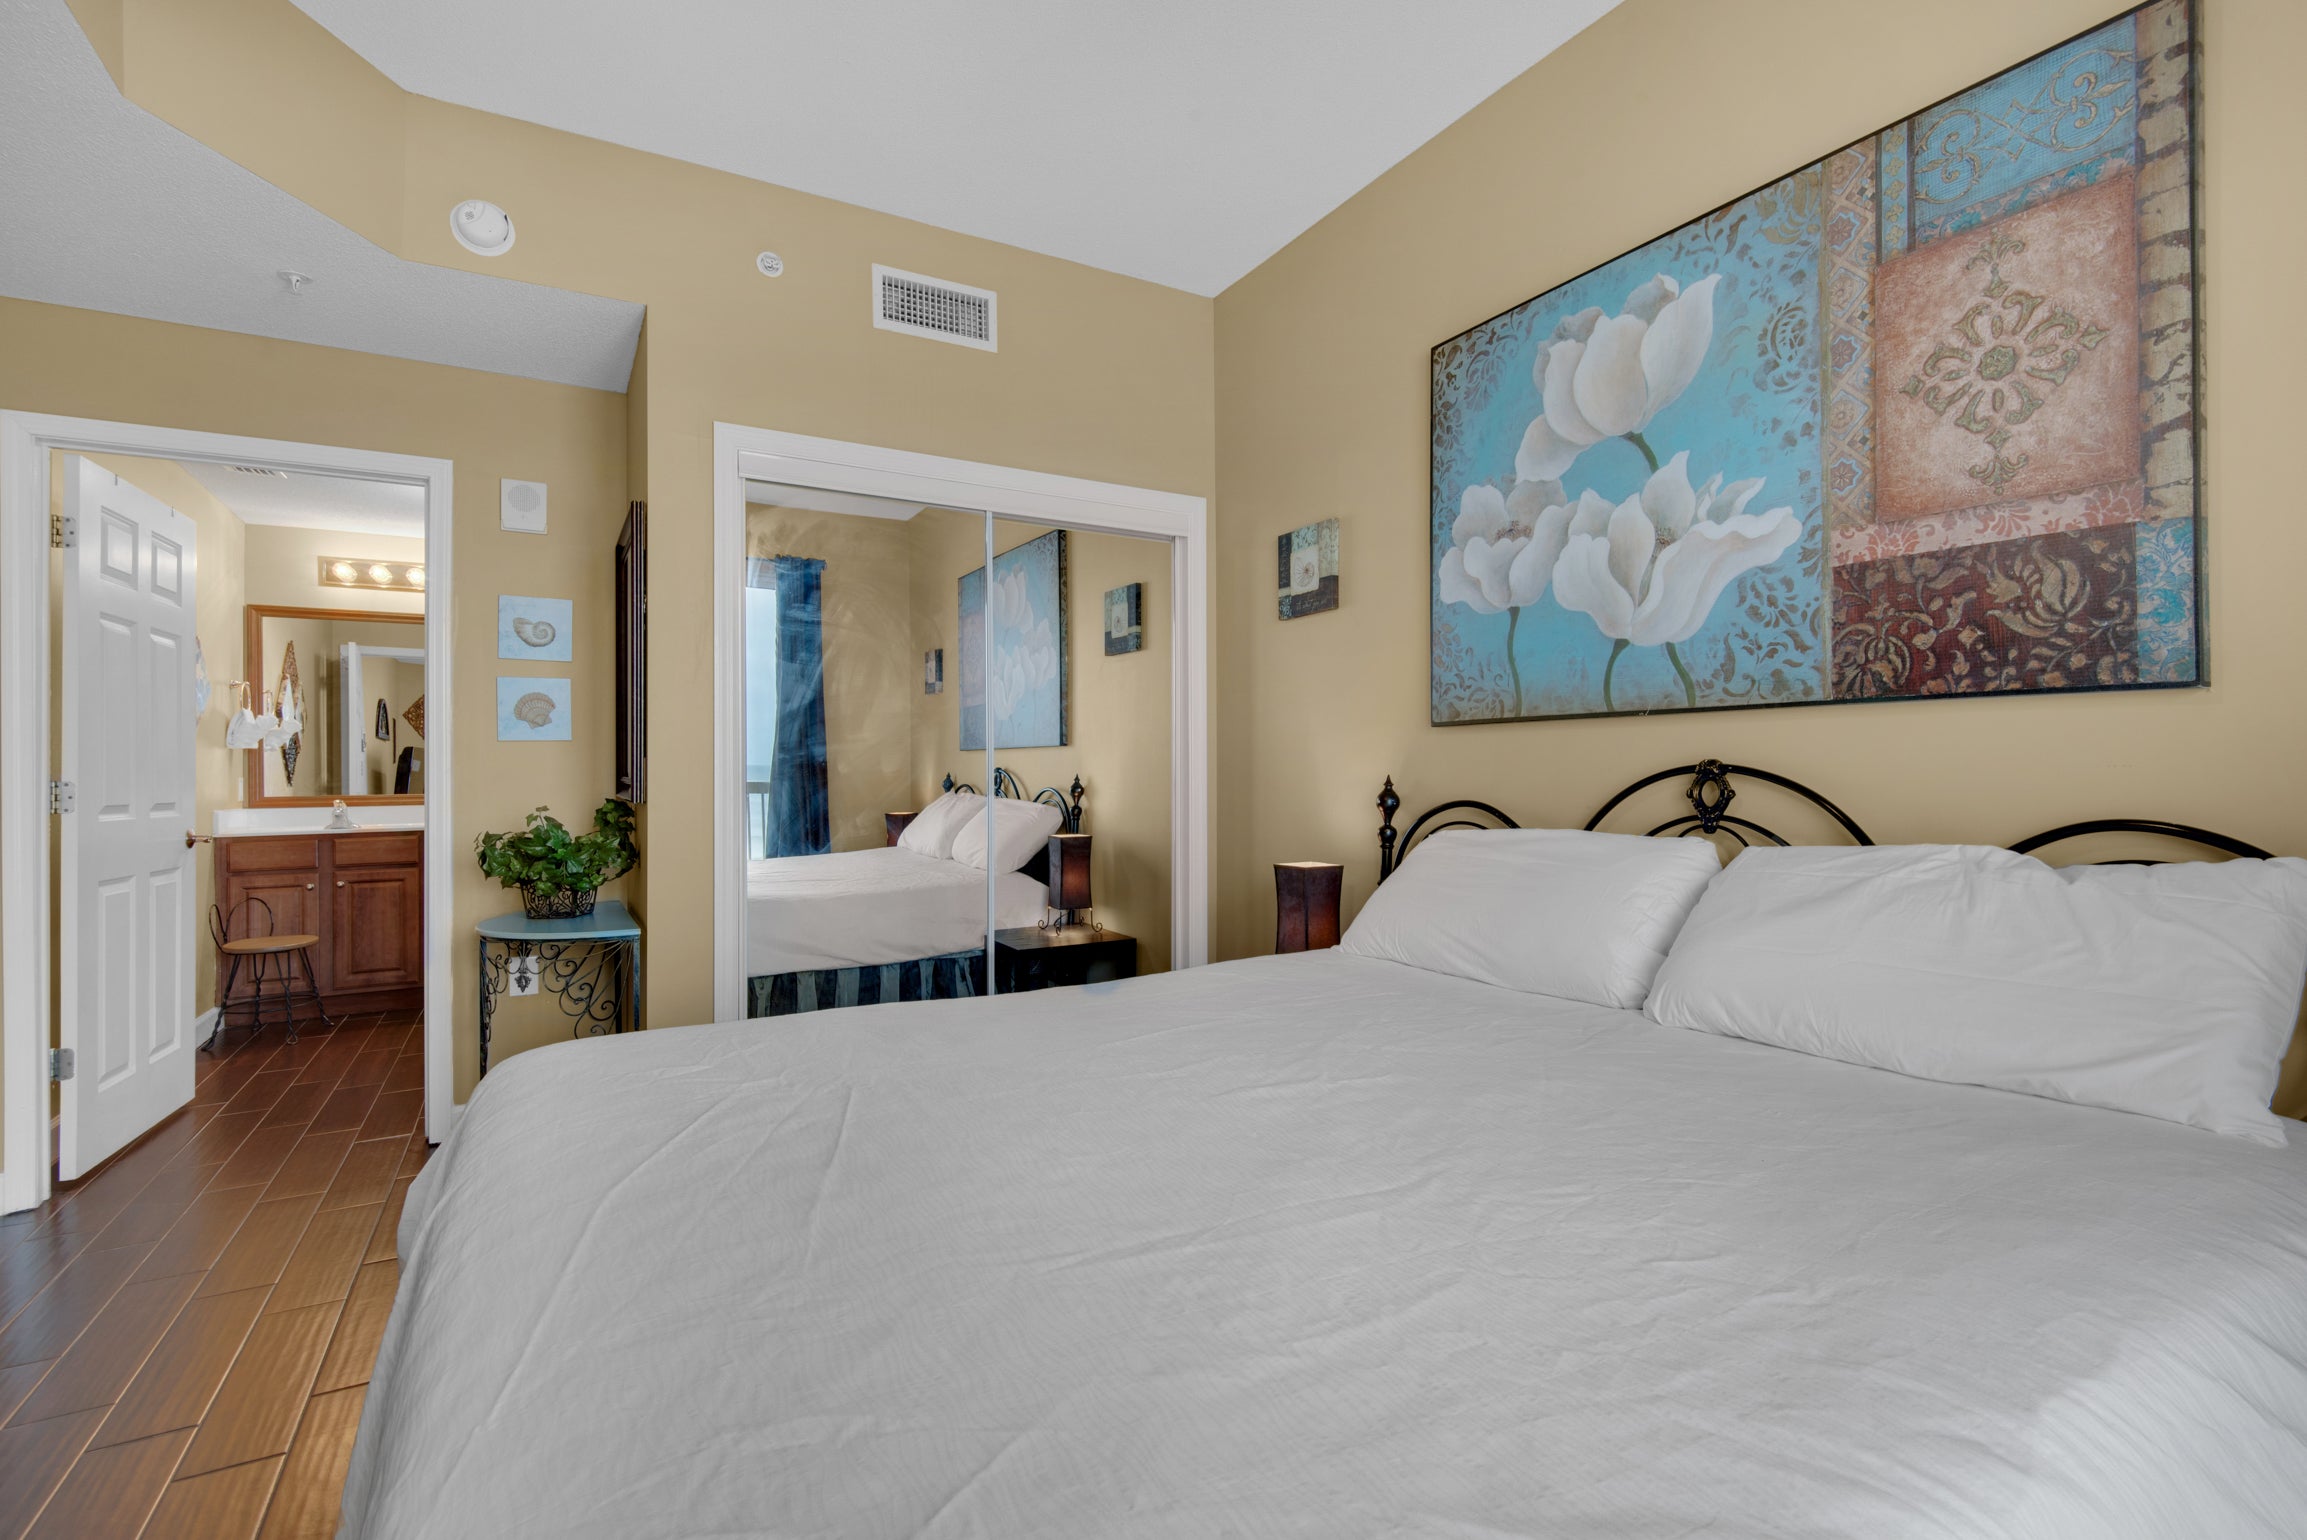 Master suite has everything you need!